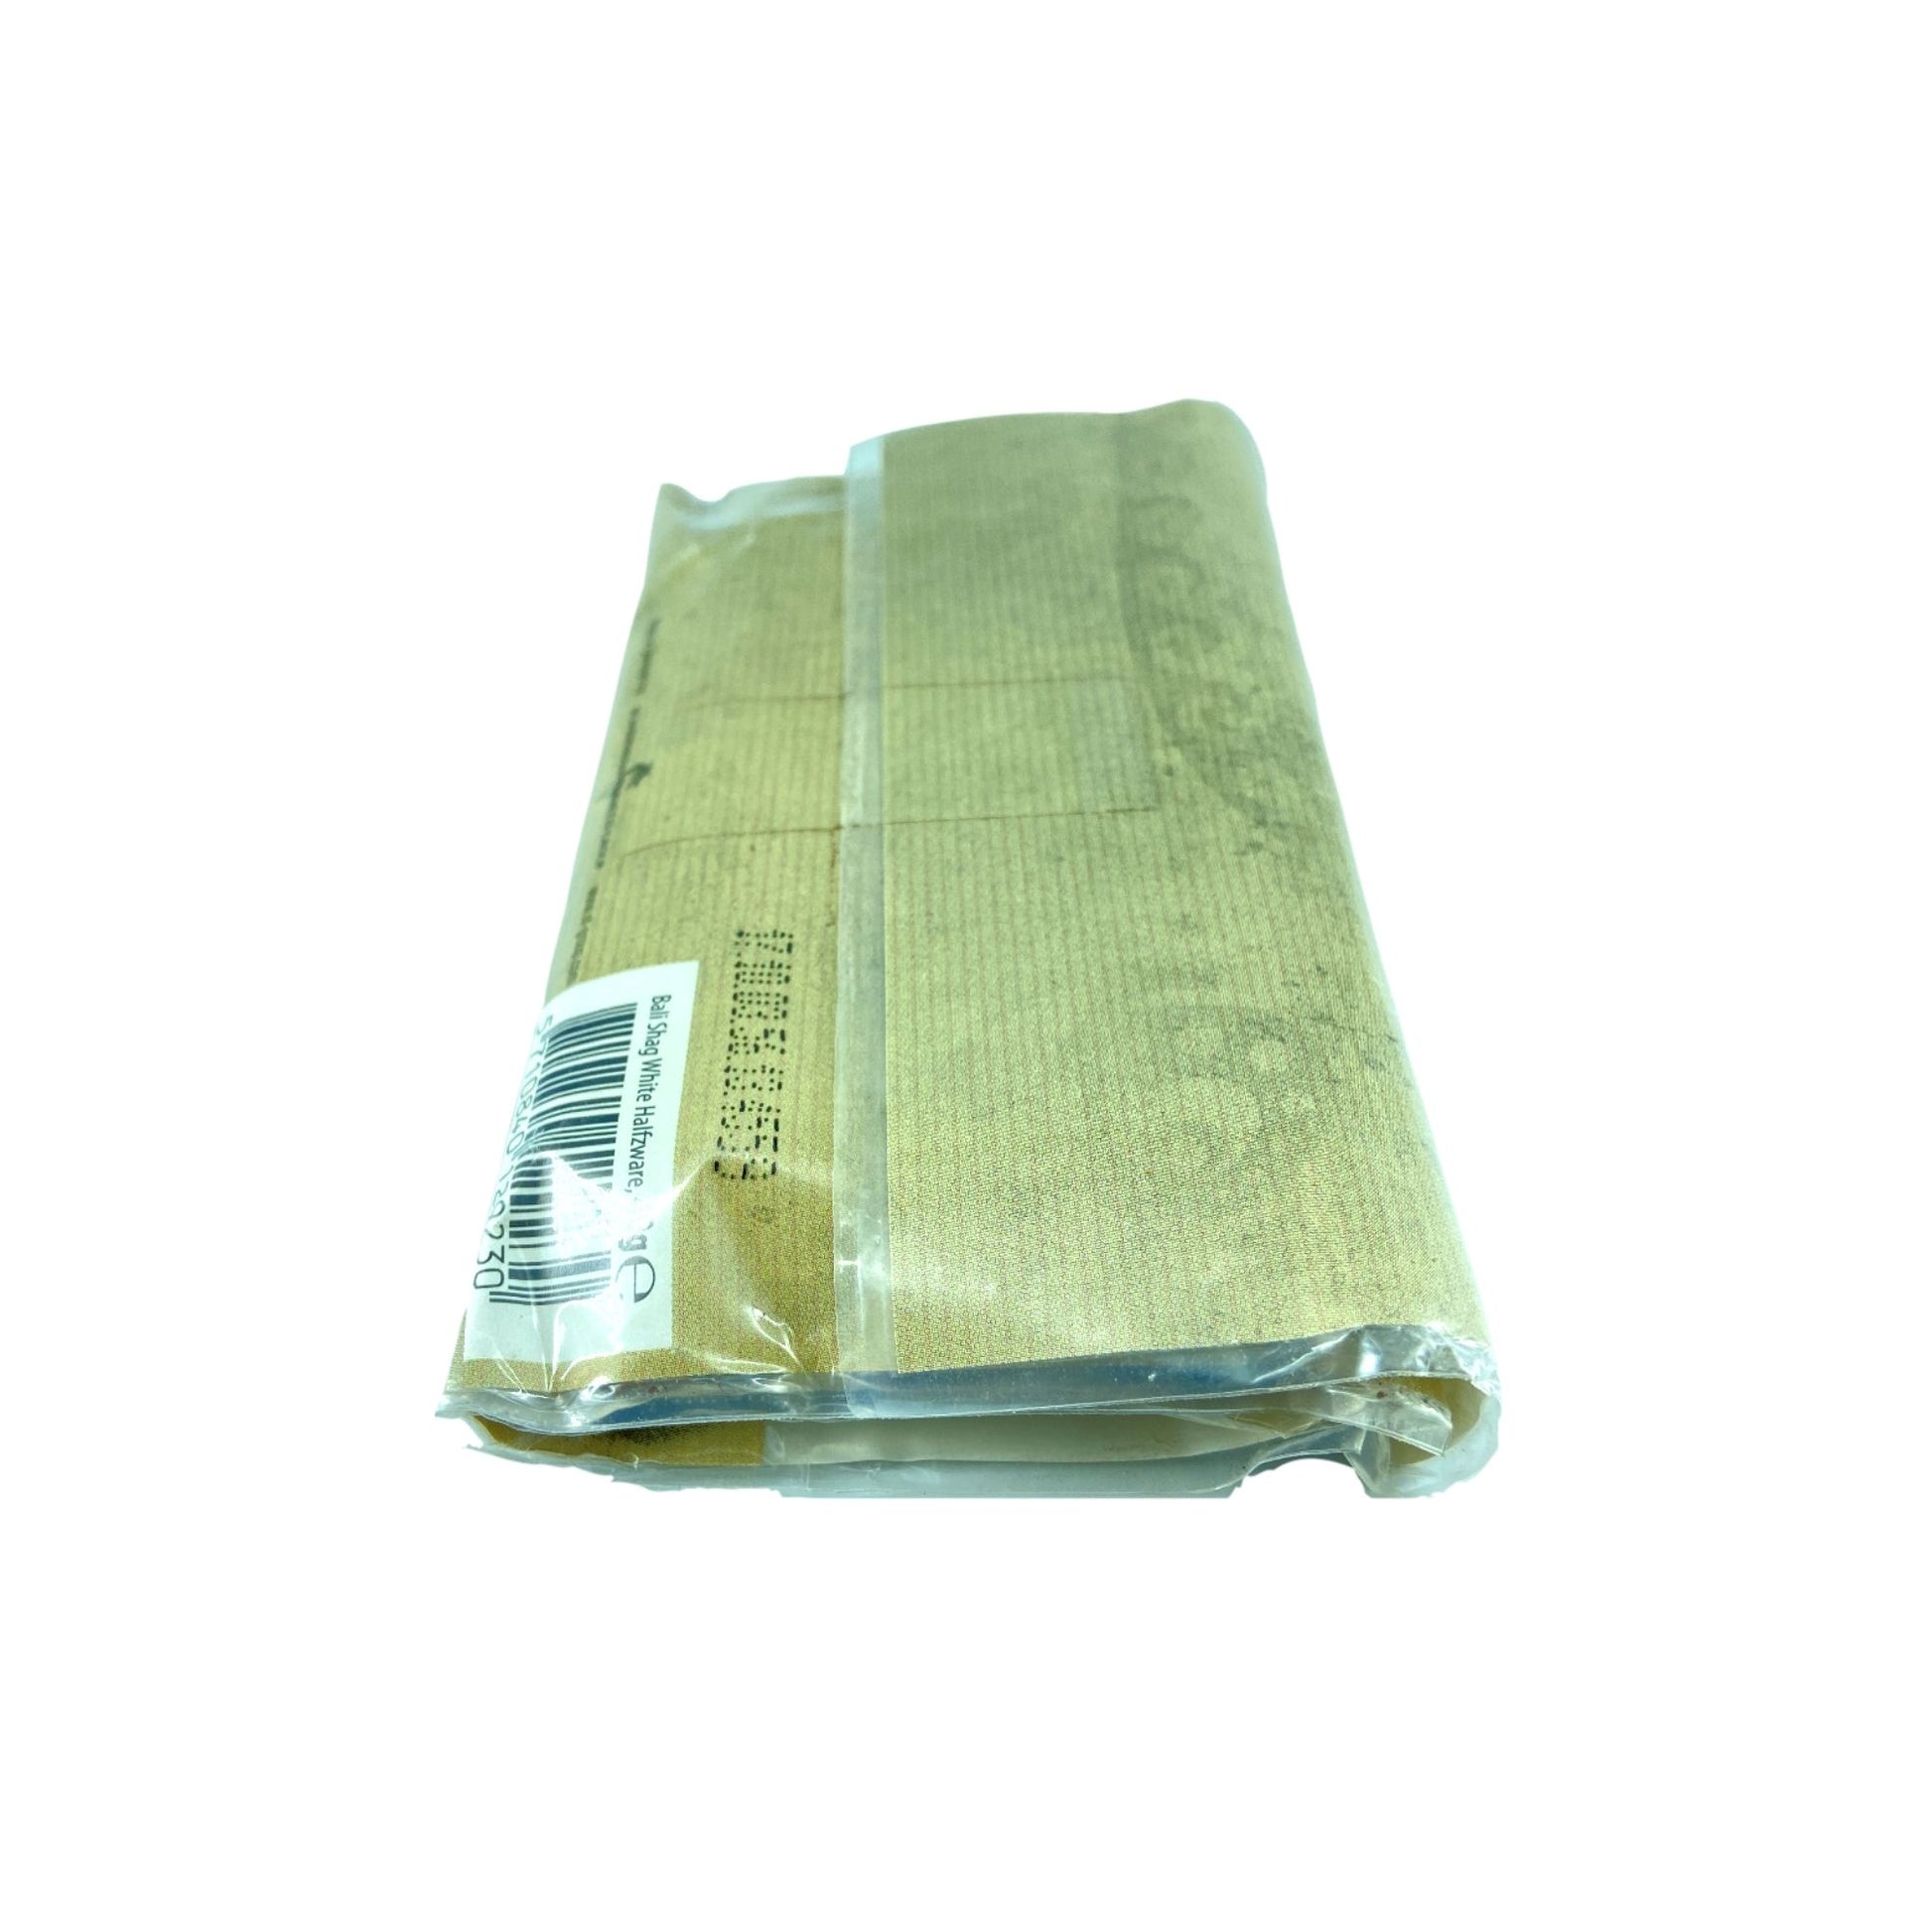 Buy Bali Shag White Halfzware Hand Rolling Tobacco online in India